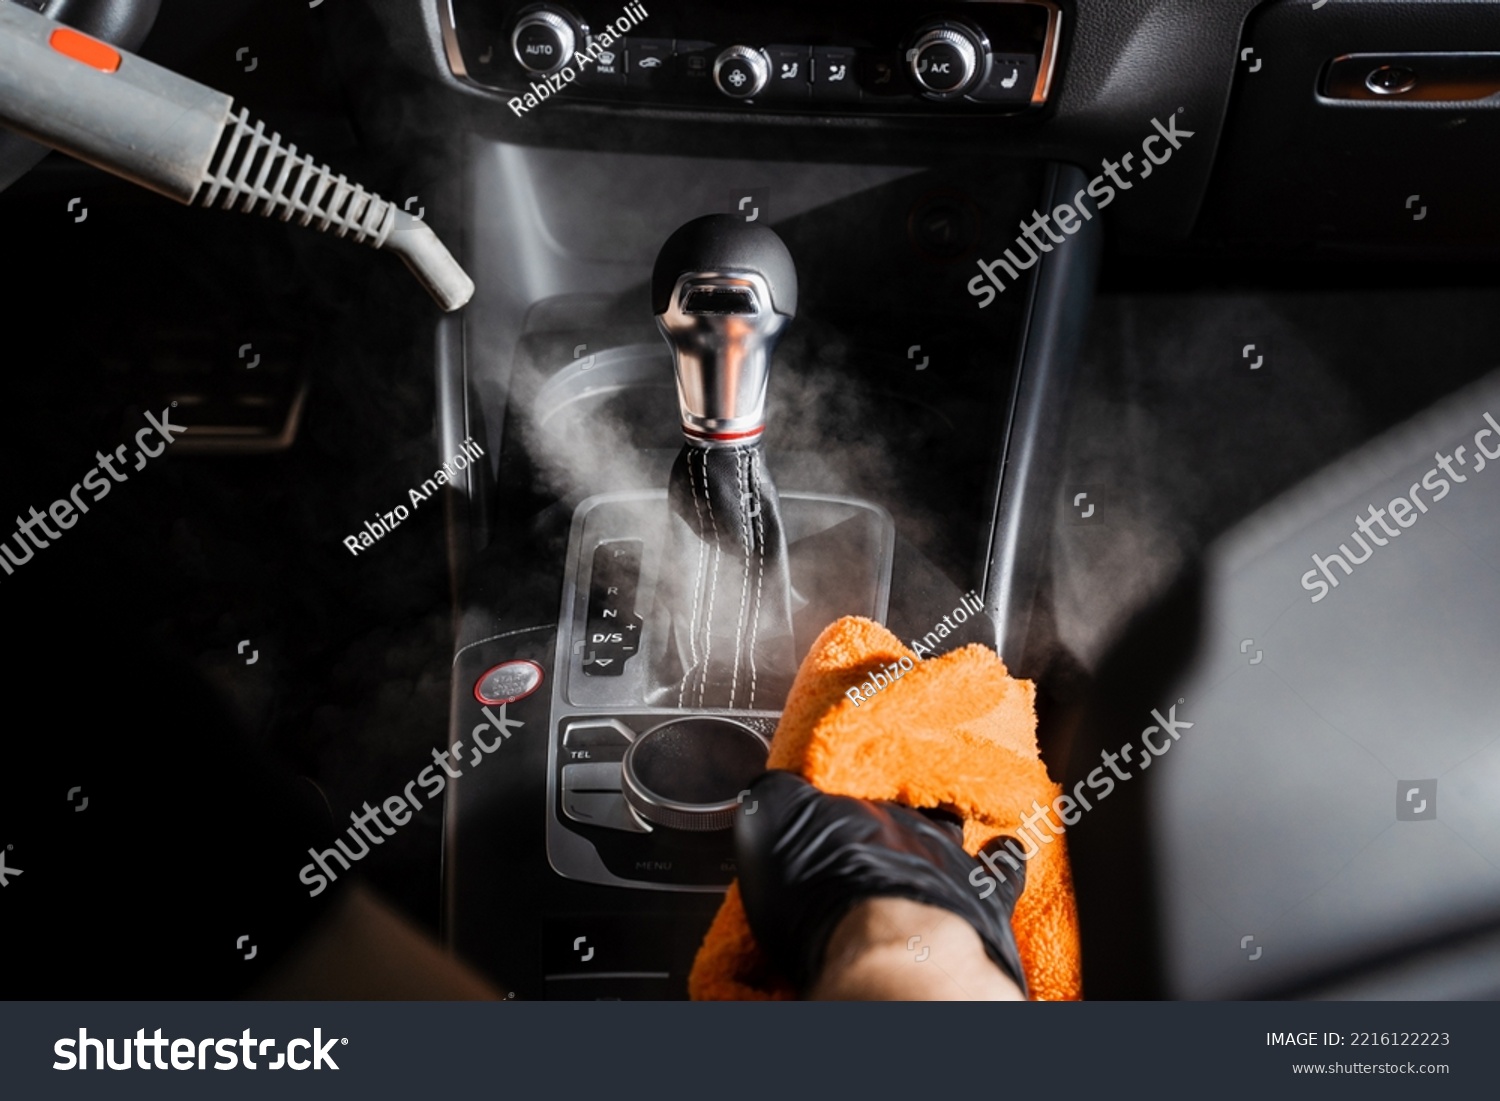 Steam cleaning of gearbox and dashboard in car. Vaping steam. Cleaning individual elements of black leather interior in auto. Creative advert for auto detailing service #2216122223